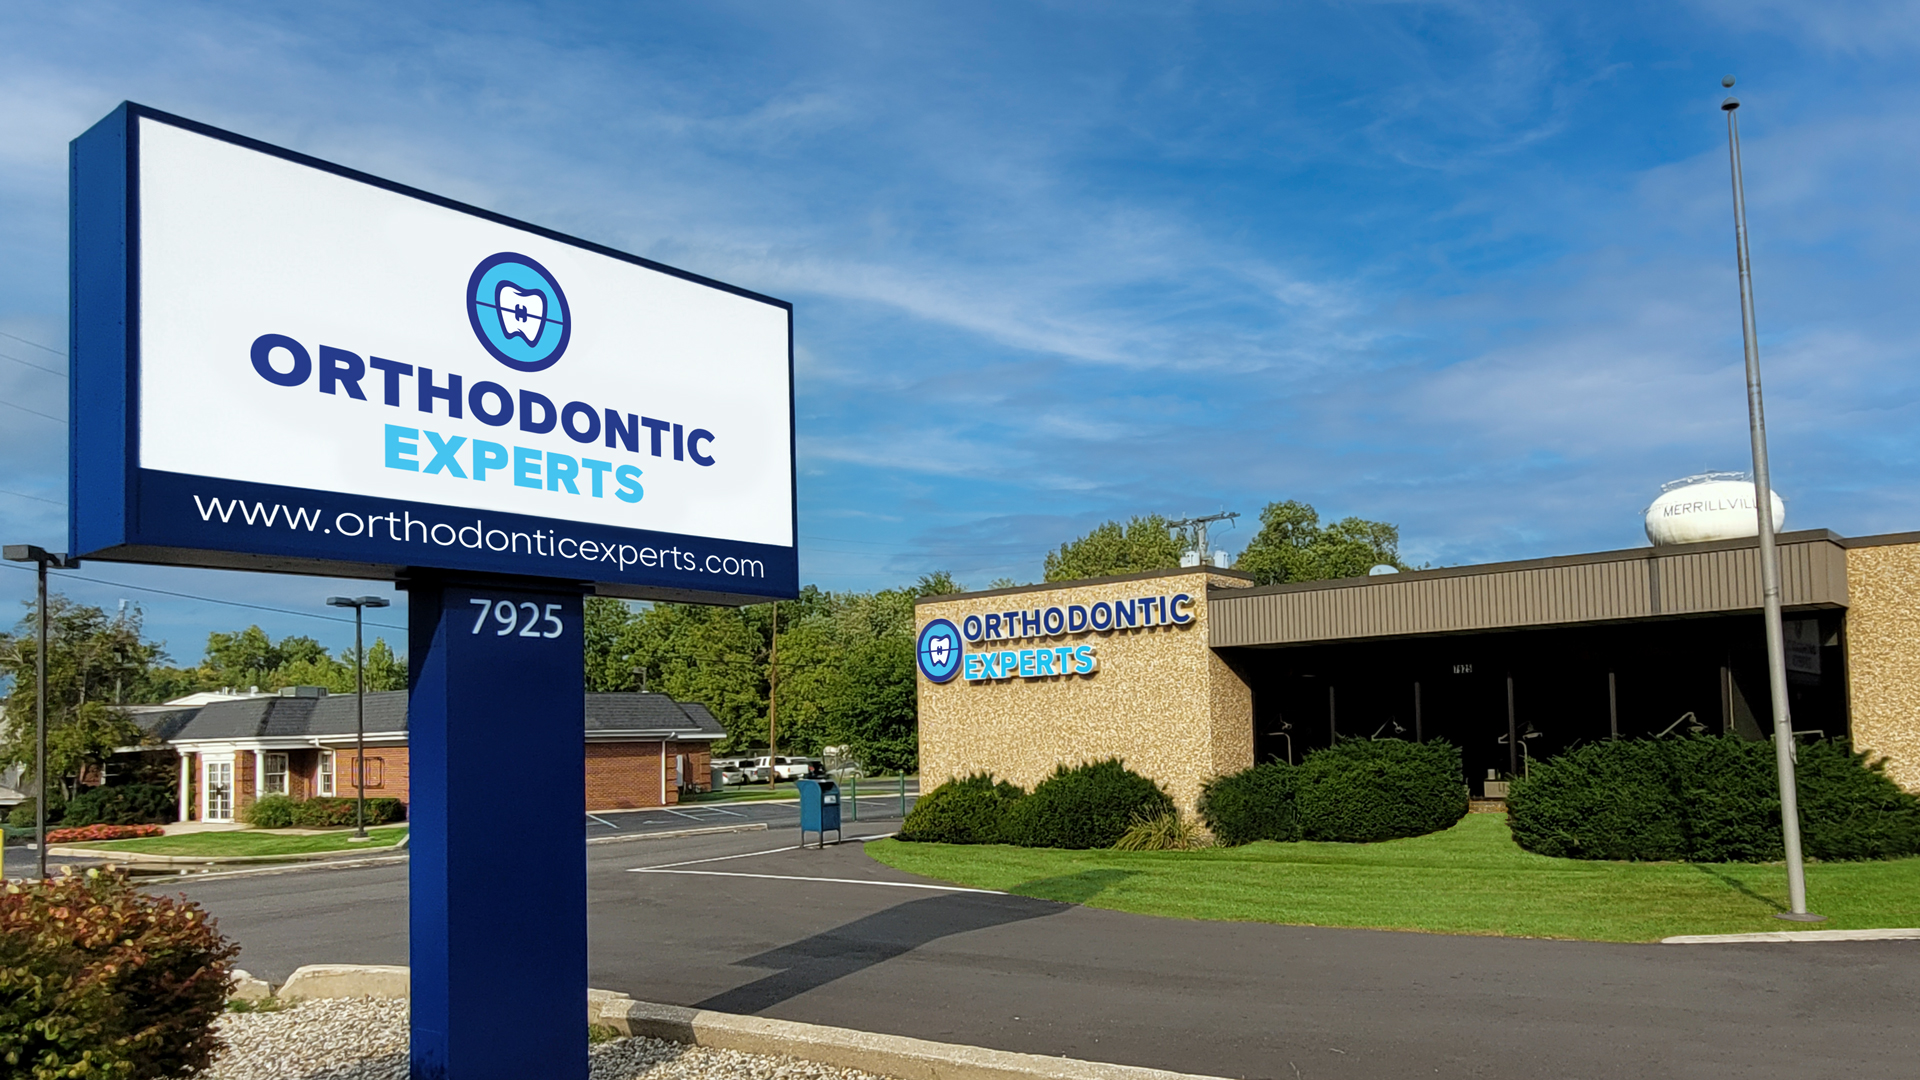 Orthodontic Experts building sign with logo design